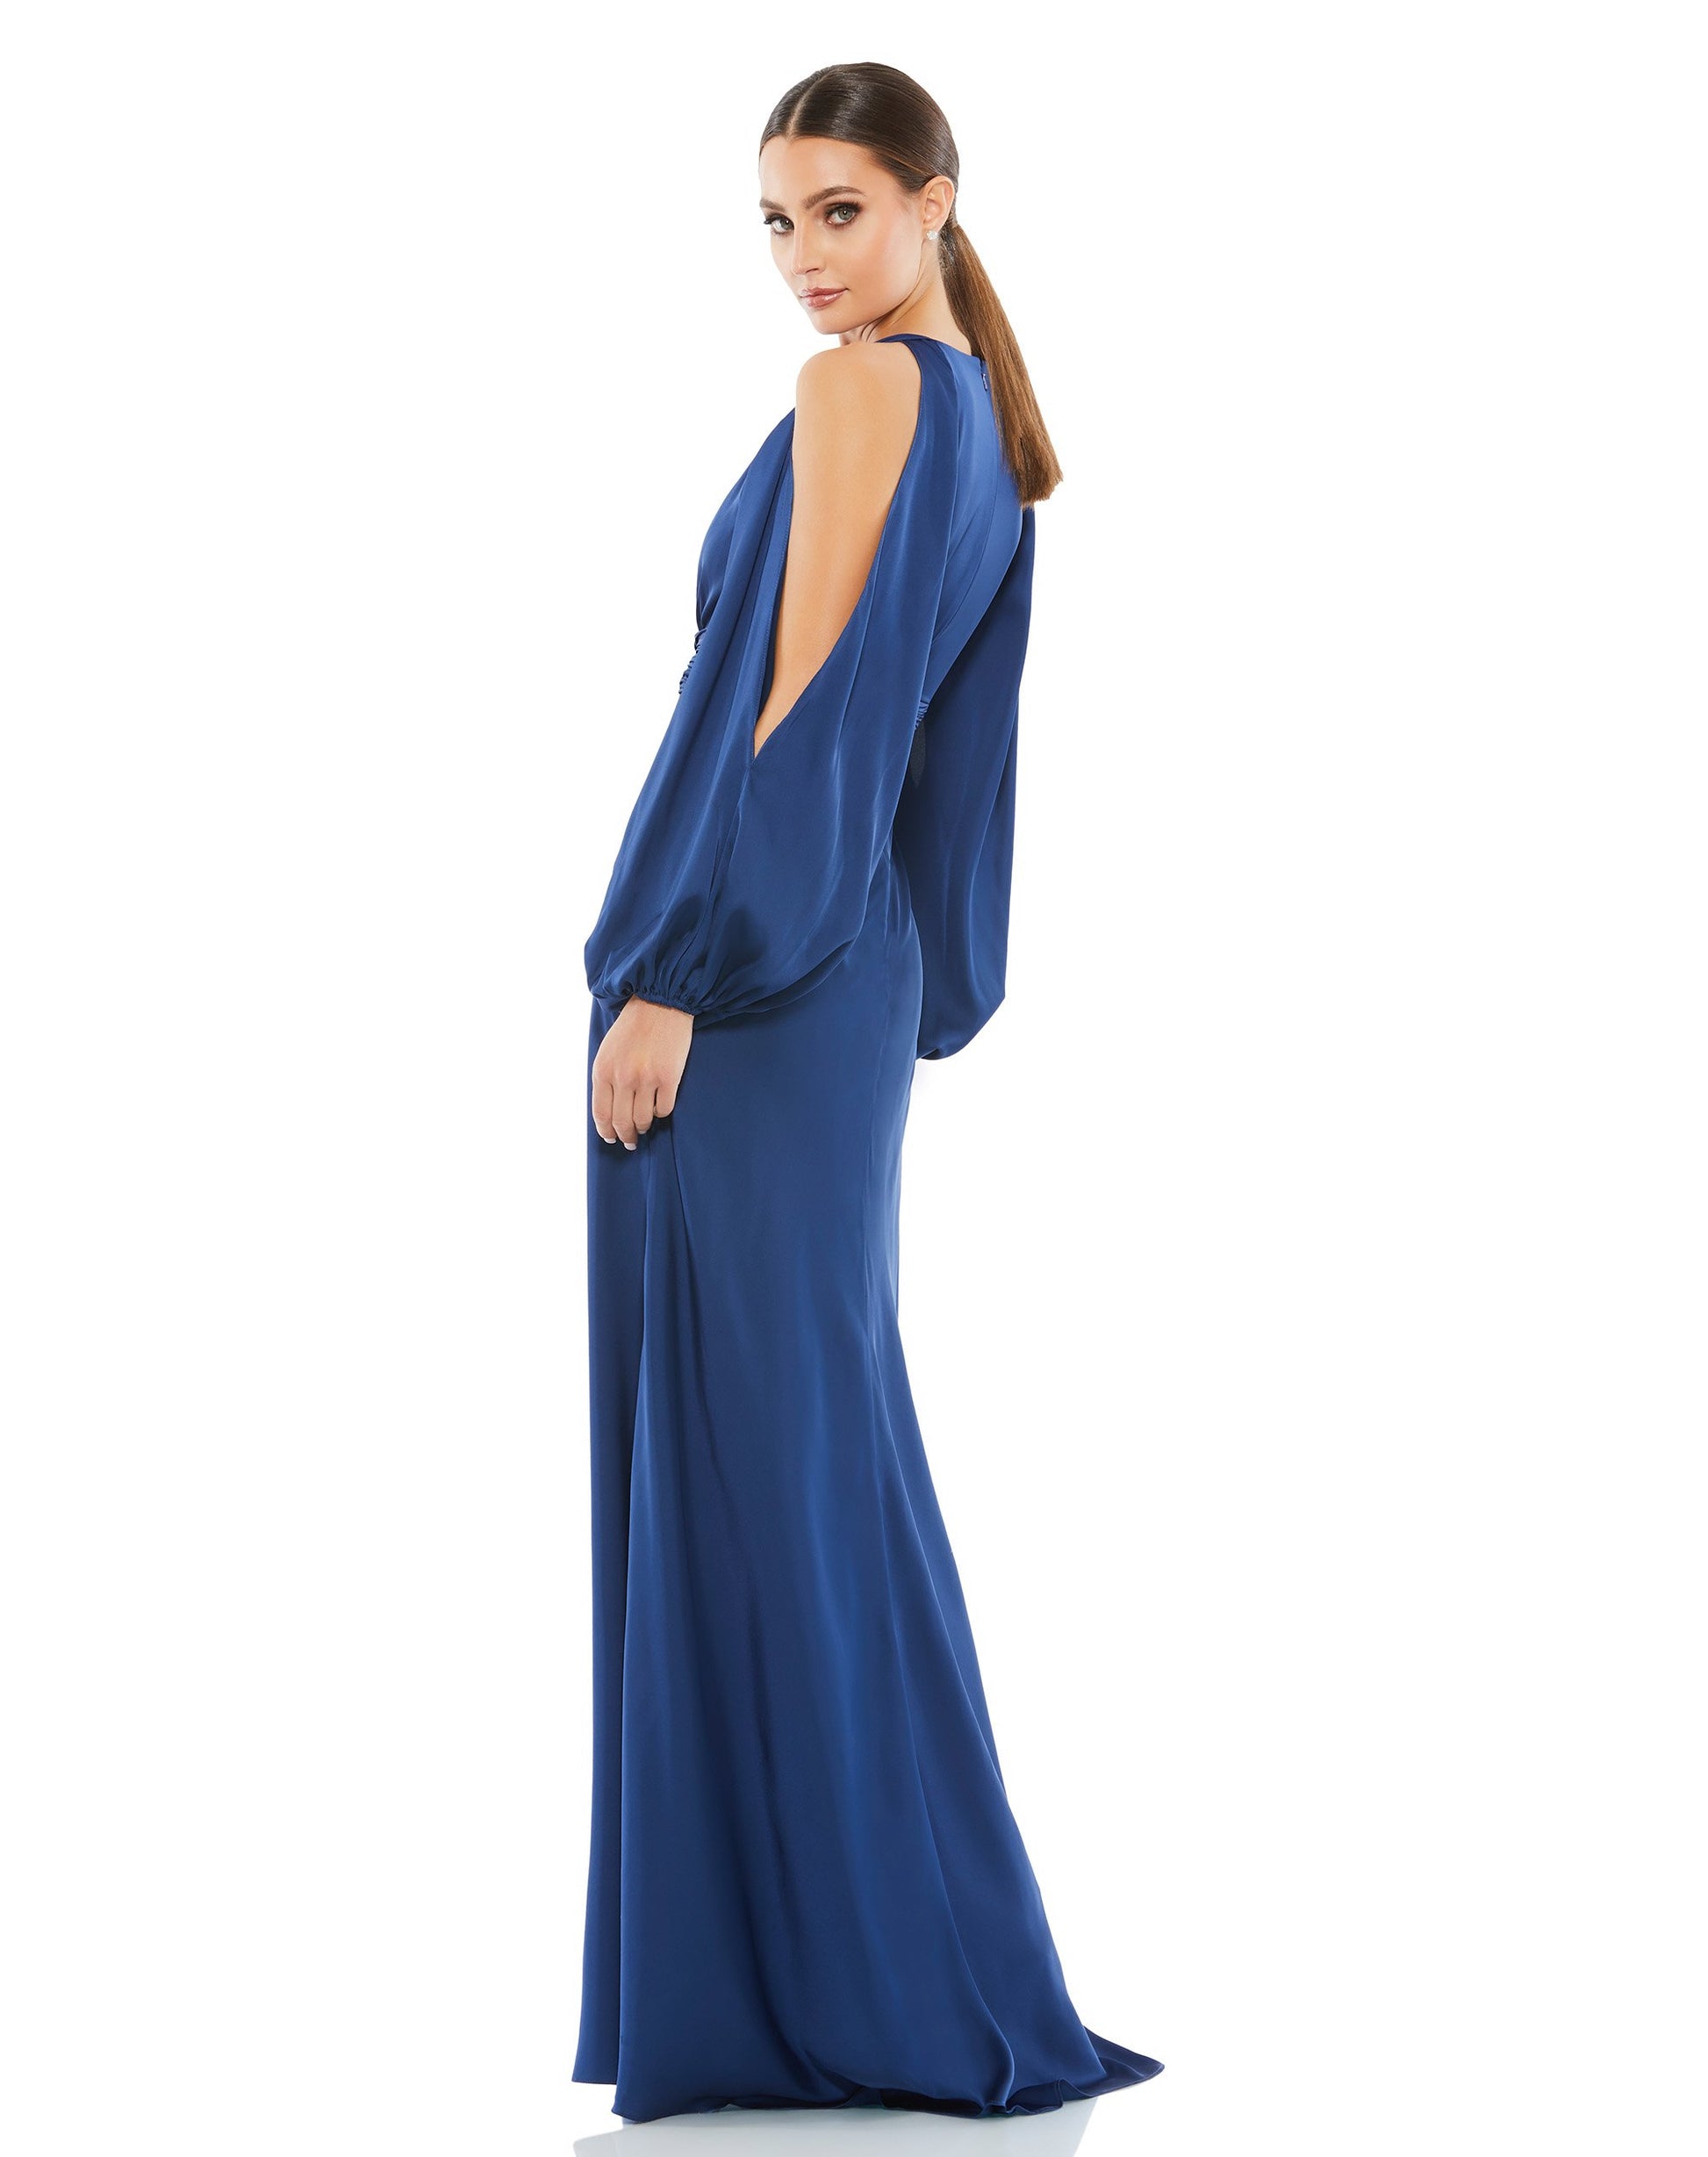 Flowing gown with a plunging self-tie keyhole neckline, pleated waistband, and cold-shoulder blousan sleeves. Ieena for Mac Duggal 100% Polyester Back Zipper Full Length Long Sleeves Style #55397